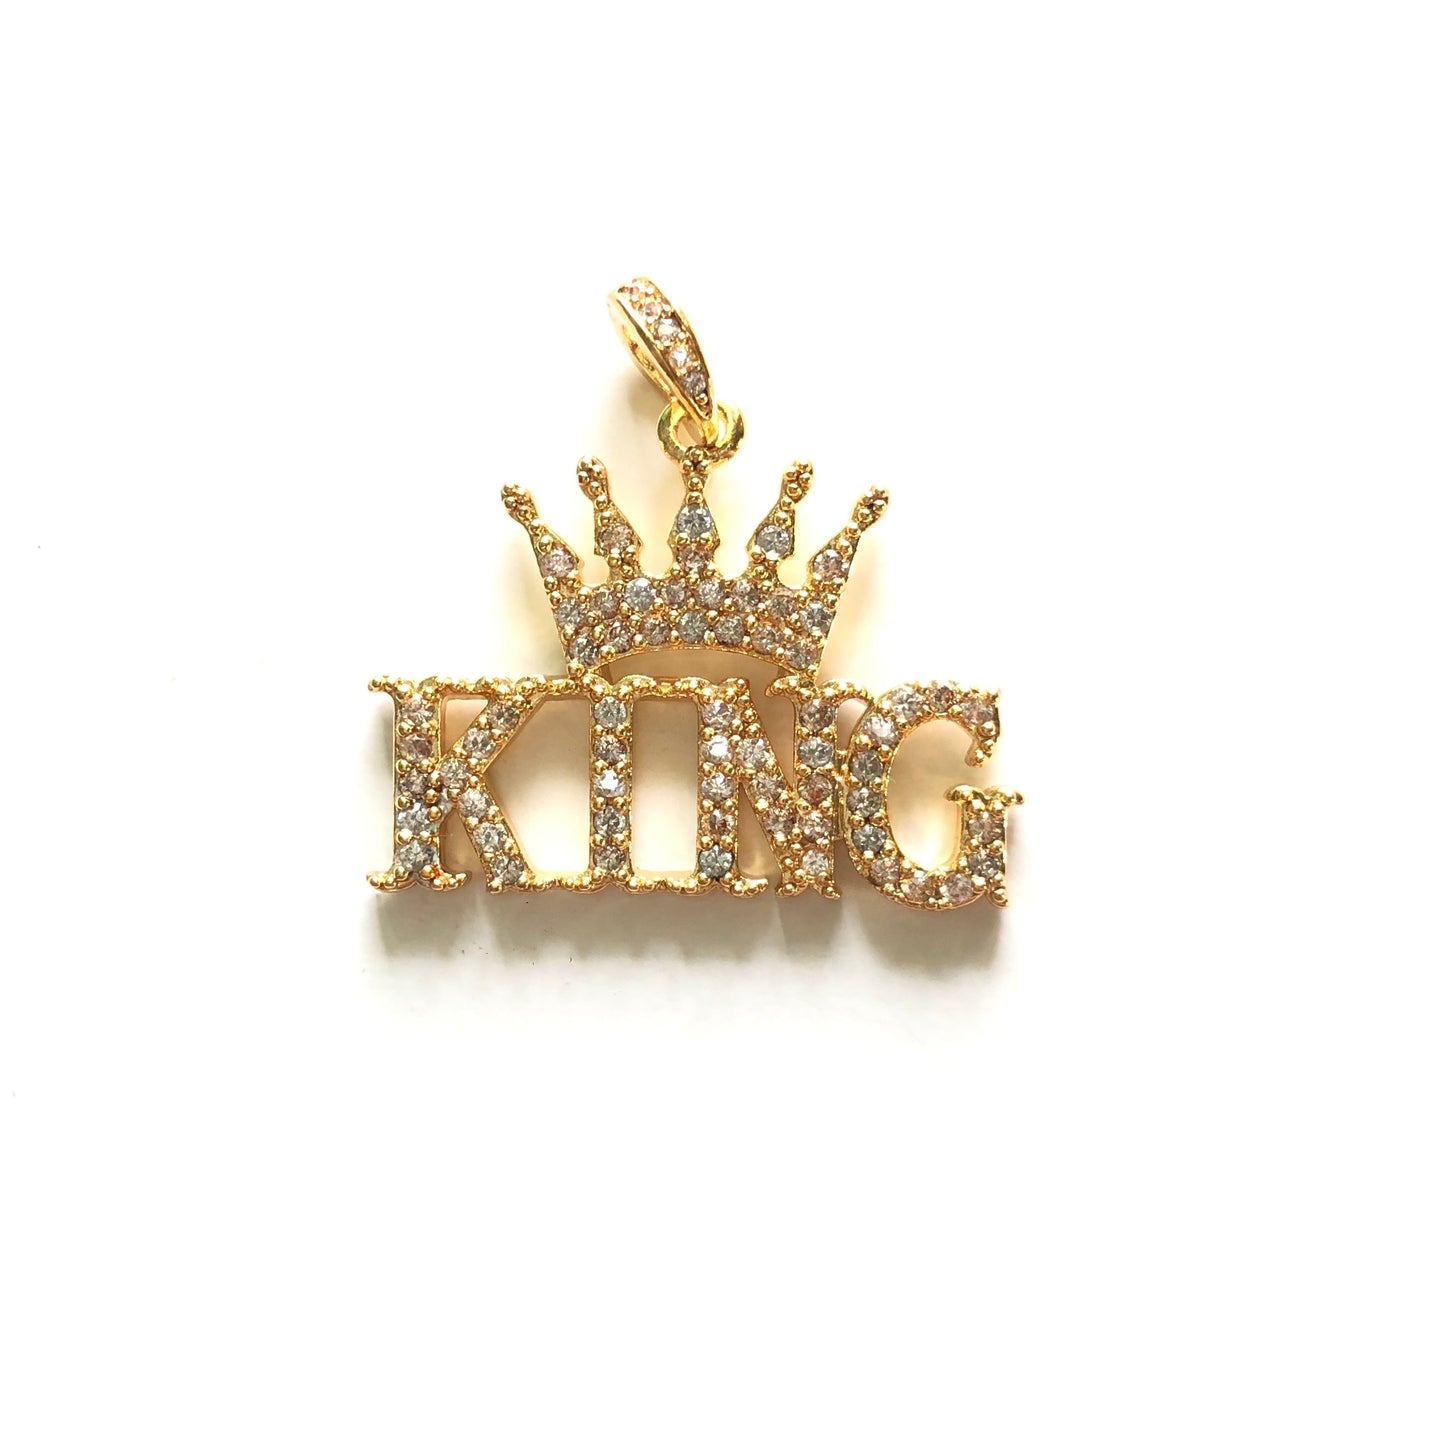 10pcs/lot 26mm*18 CZ Paved King Charms Gold CZ Paved Charms Words & Quotes Charms Beads Beyond